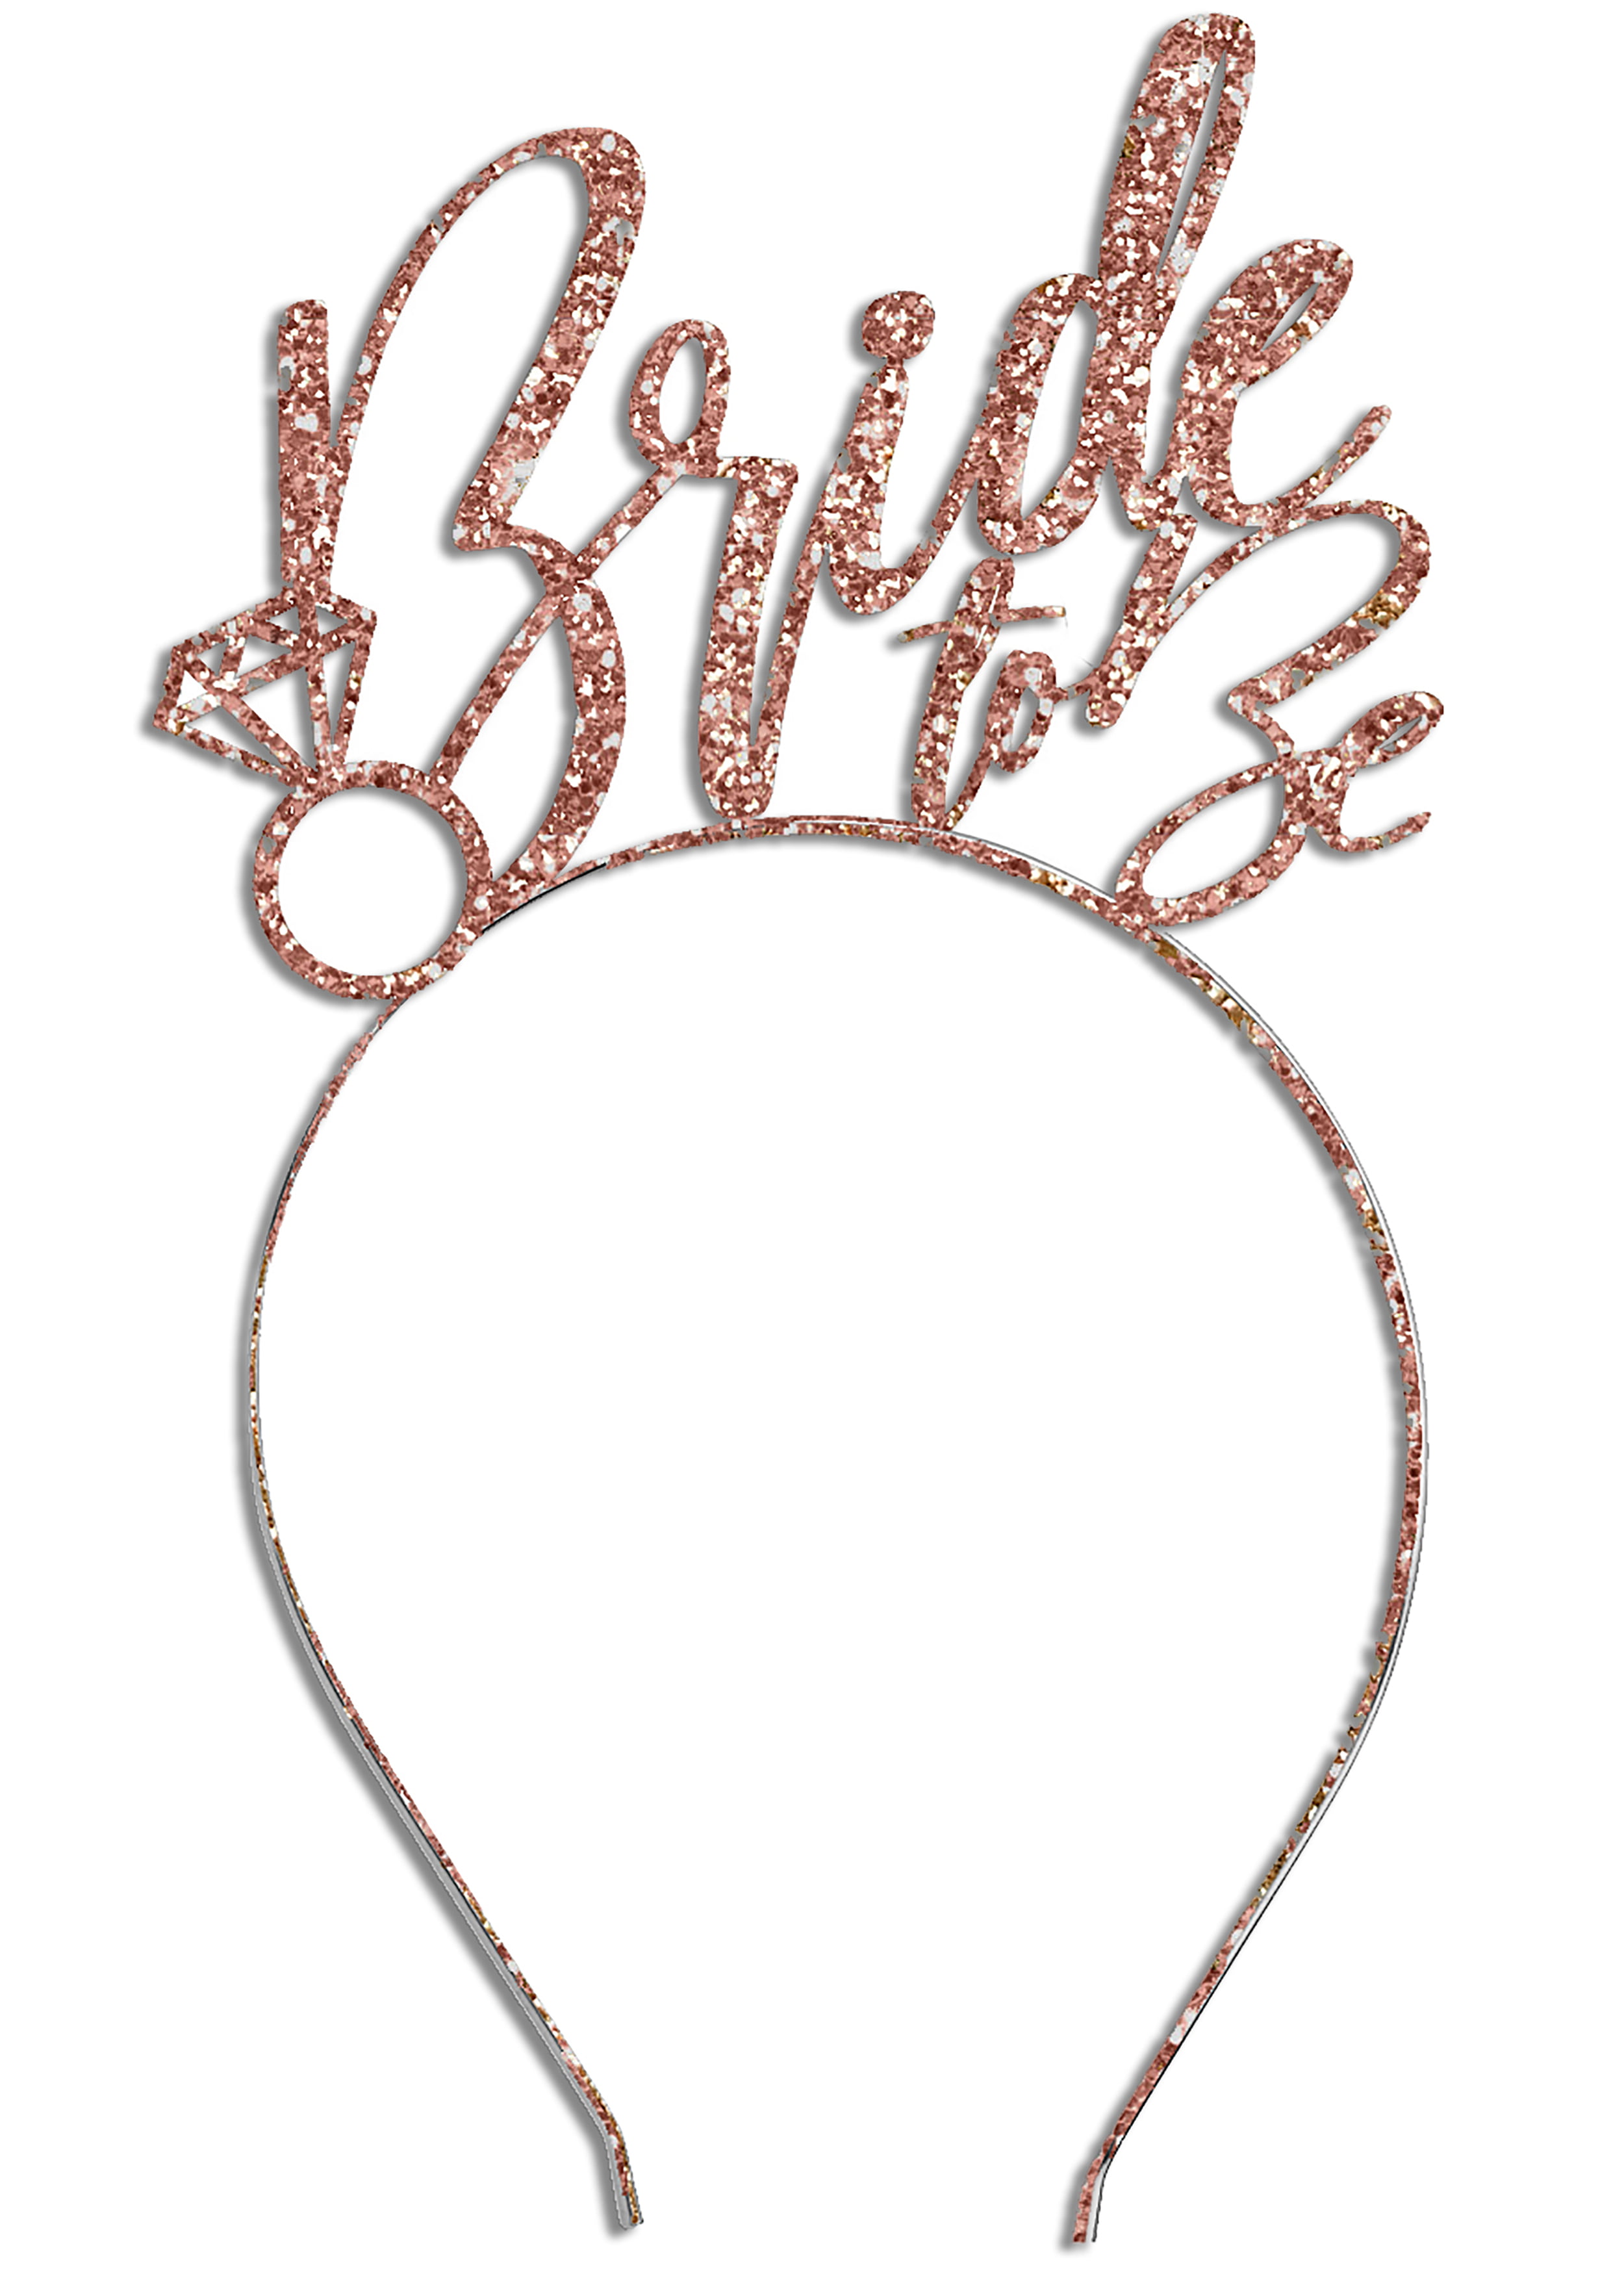 Details about   Bride To Be Tiara Crown Headband Bachelorette Party Bridal Shower Wedding Decors